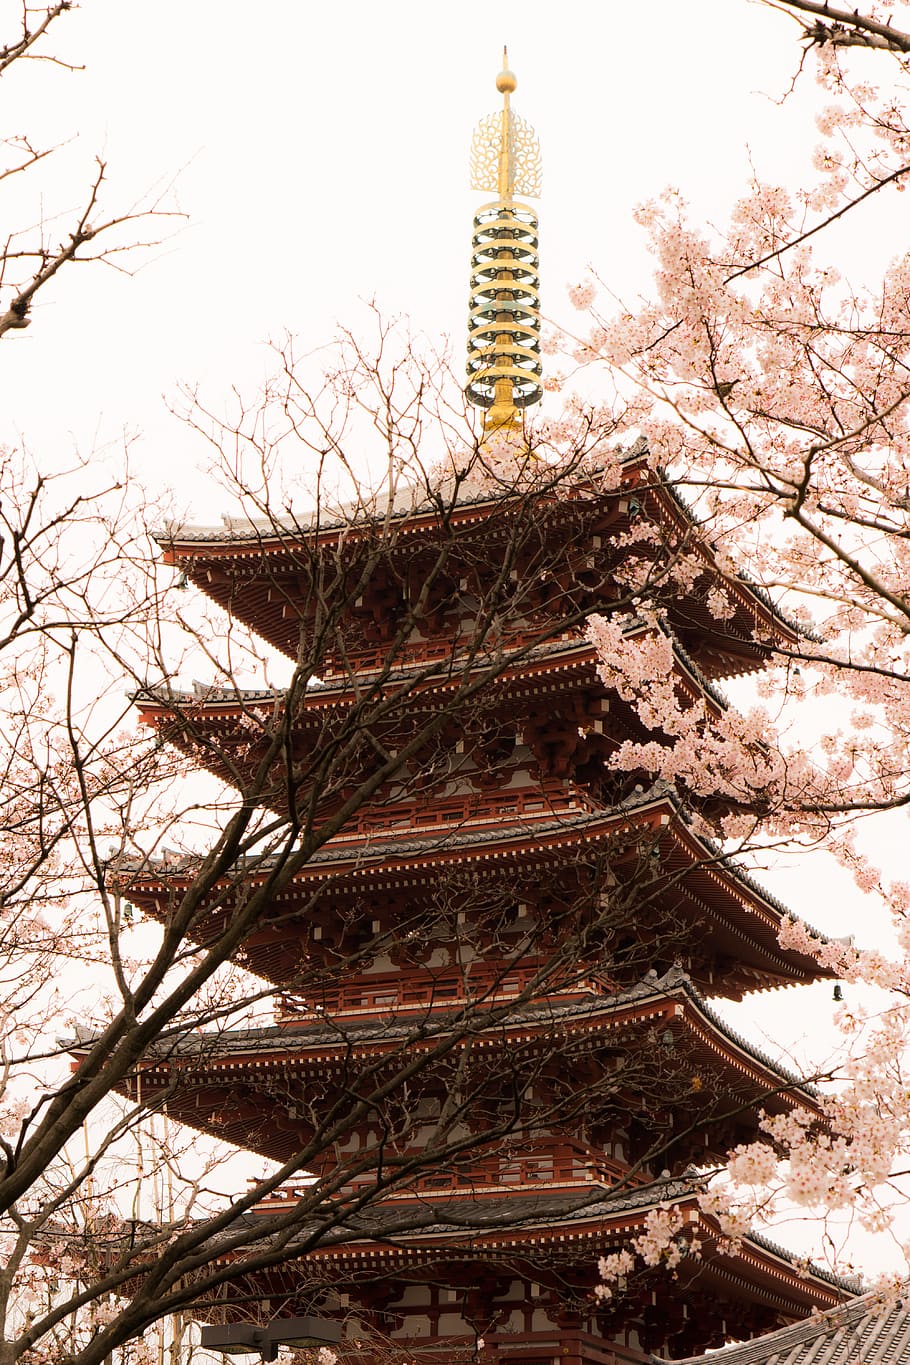 Japanese tower with cherry blossom trees, Asakusa, Cherry Blossoms